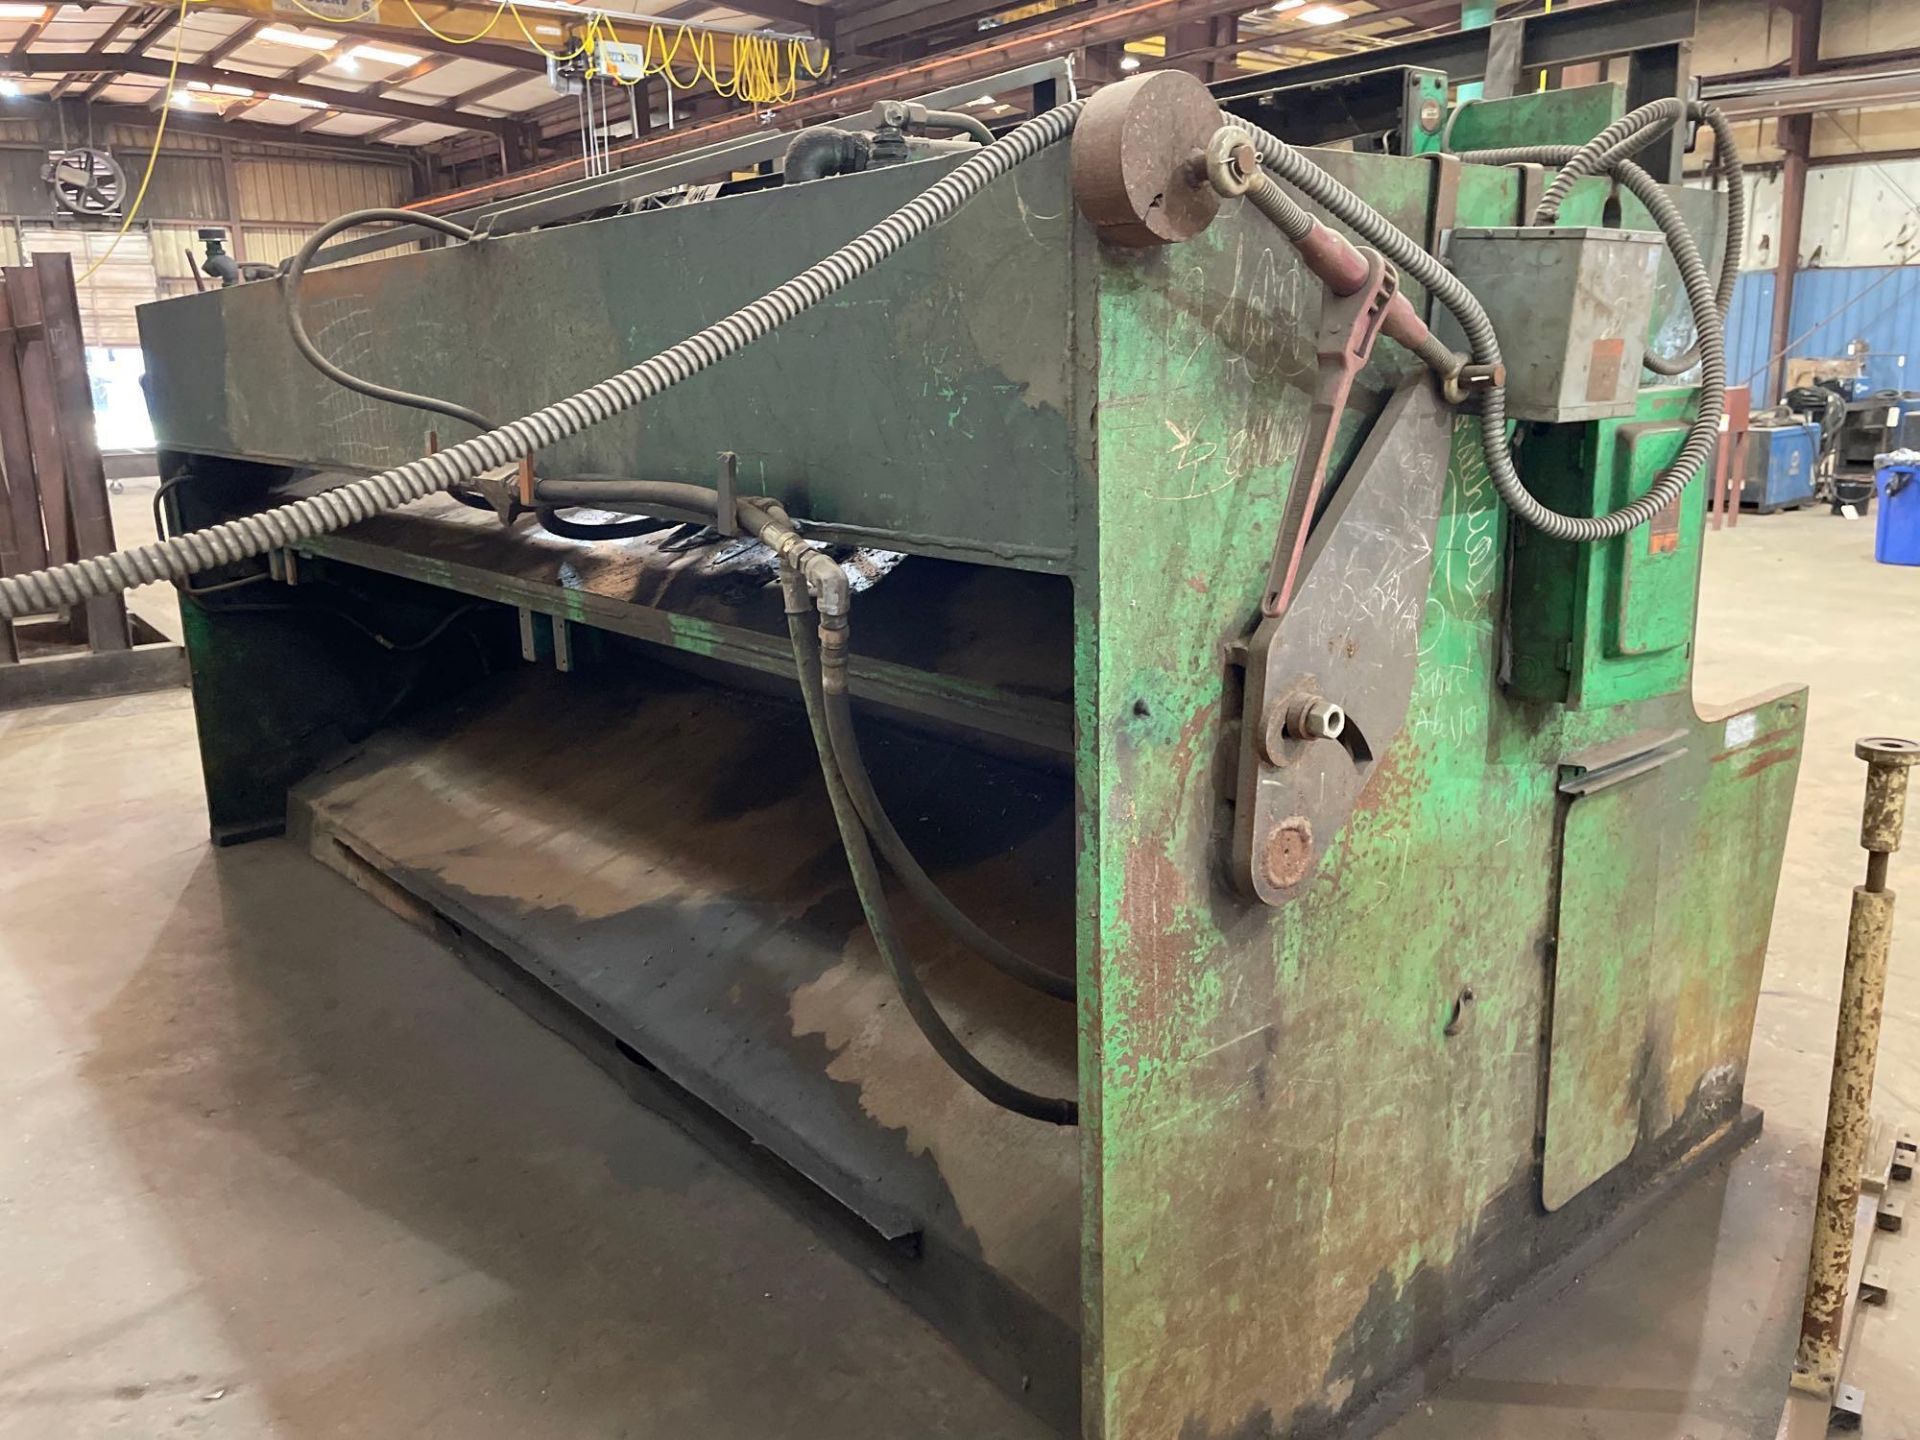 12’ Metal Cutting Shear, Brand N/A, with Direct Logic 105 Lito Controls - Image 9 of 9